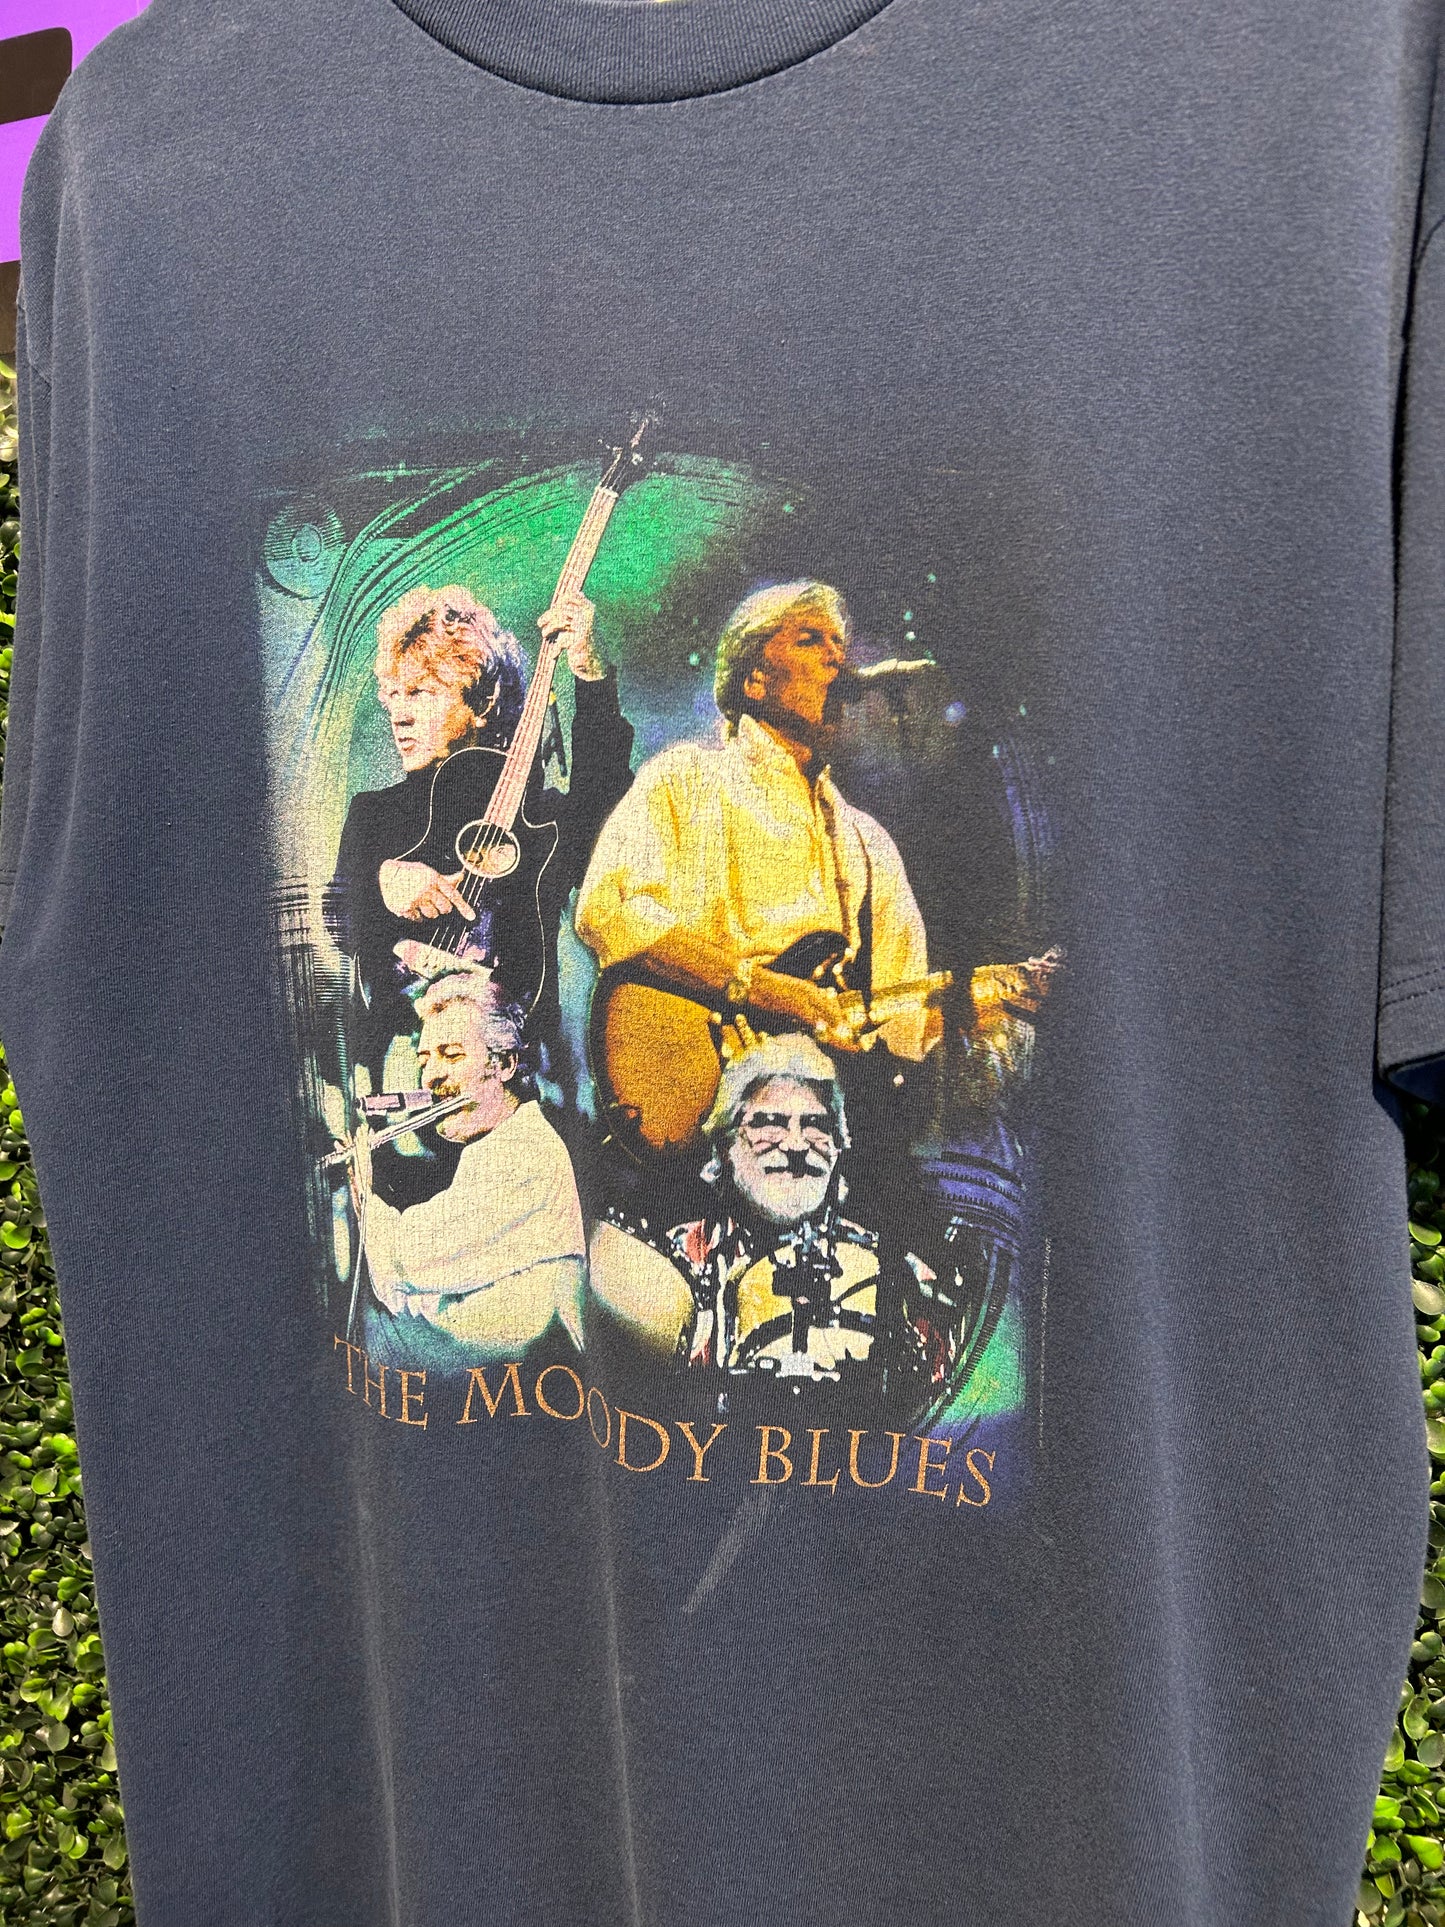 2000 The Moody Blues Hall of Fame T-Shirt. Size L/XL